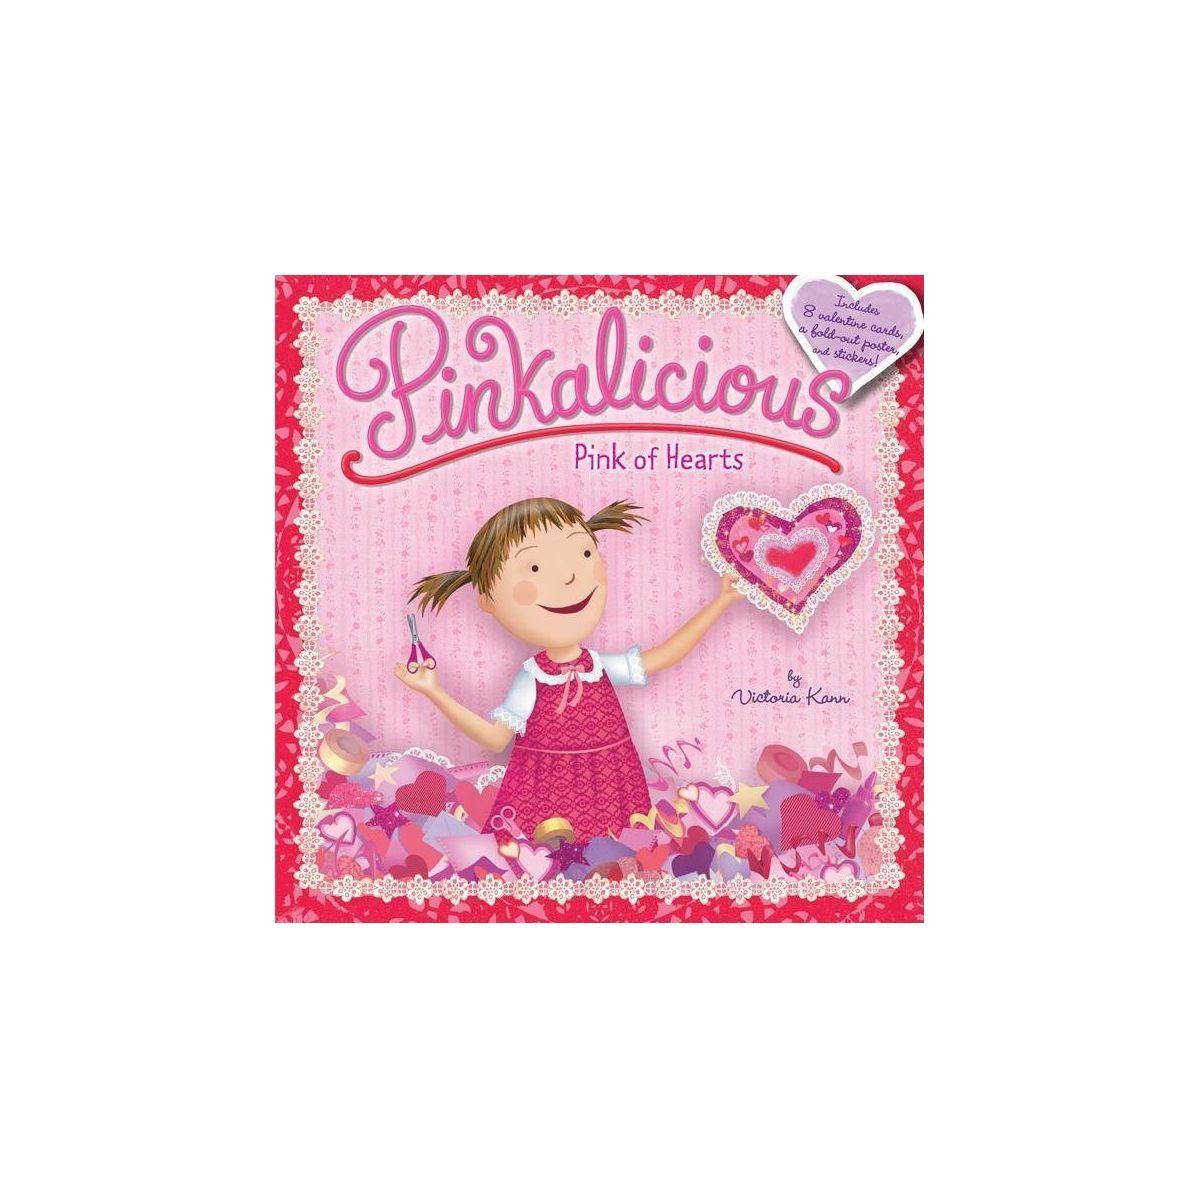 Pink of Hearts ( Pinkalicious) (Mixed media product) by Victoria Kann | Target